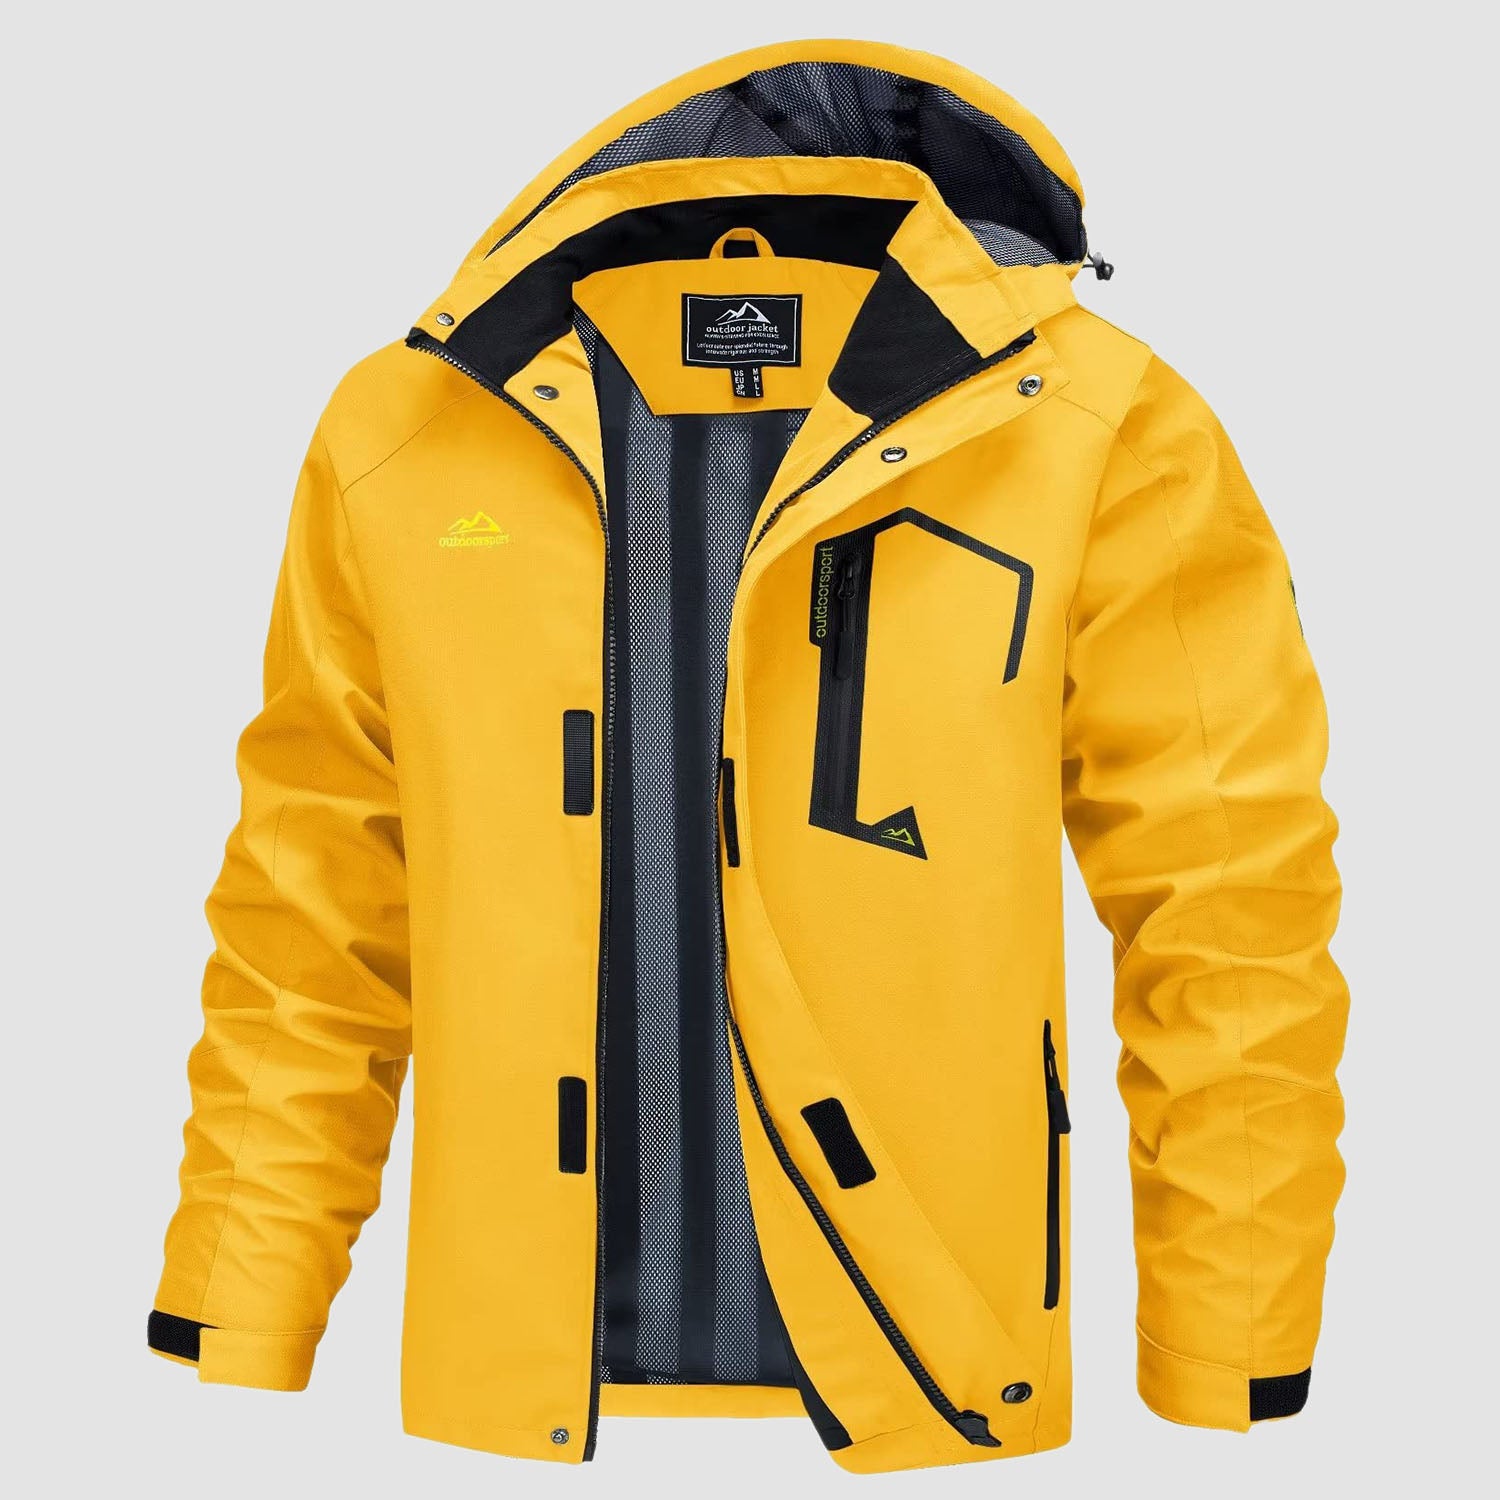 https://magcomsen.com/cdn/shop/products/Men_s-Hooded-Water-Resistant-Rain-Jacket-Windbreaker-with-Multi-Pockets-for-Hiking-Fishing-Runing_12_1.jpg?v=1669280055&width=1500